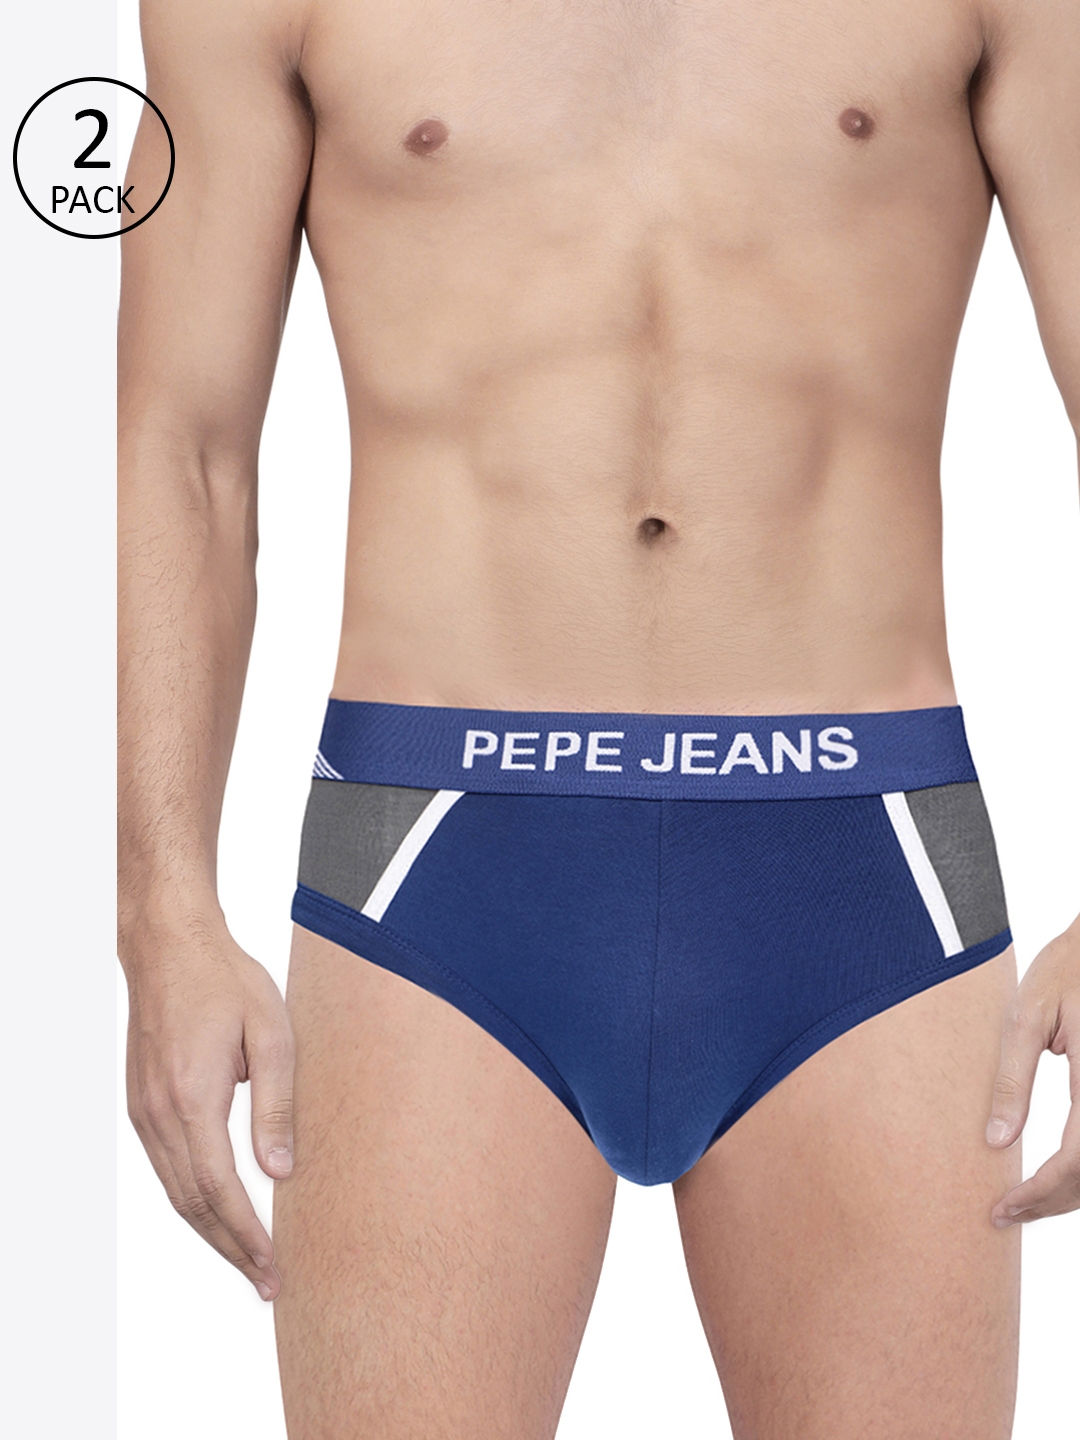 Buy Pepe Jeans Men Pack Of 2 Blue And Grey Colourblocked Briefs 8936655 2 Briefs For Men 0600